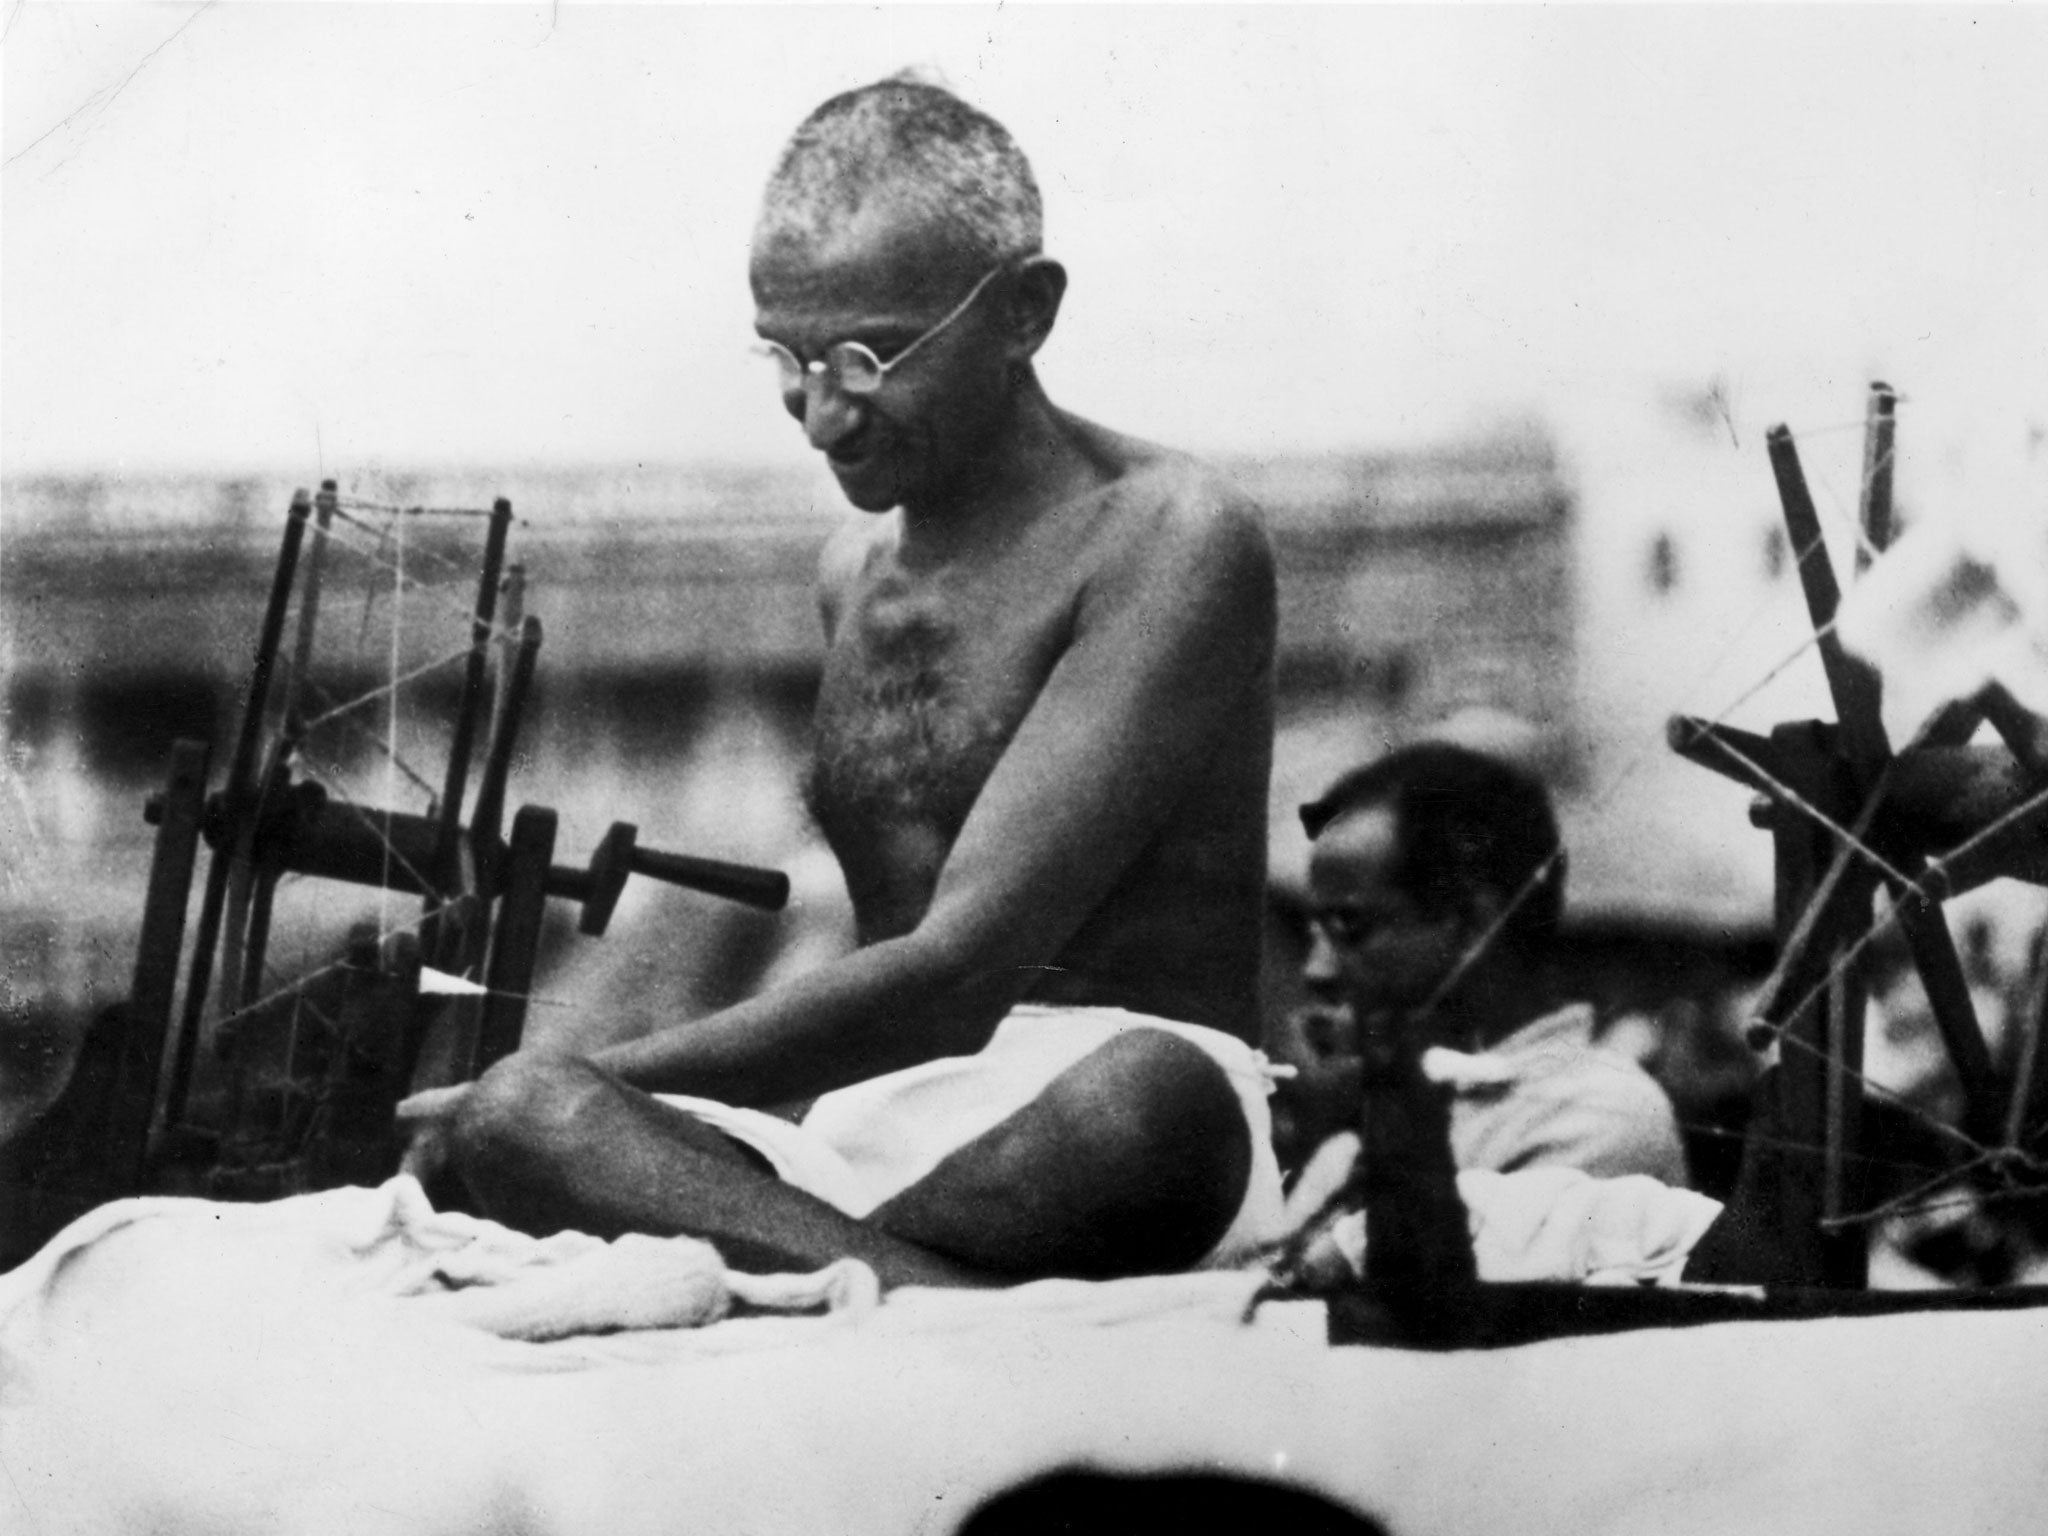 Will the "real" Mahatma Gandhi please stand up?